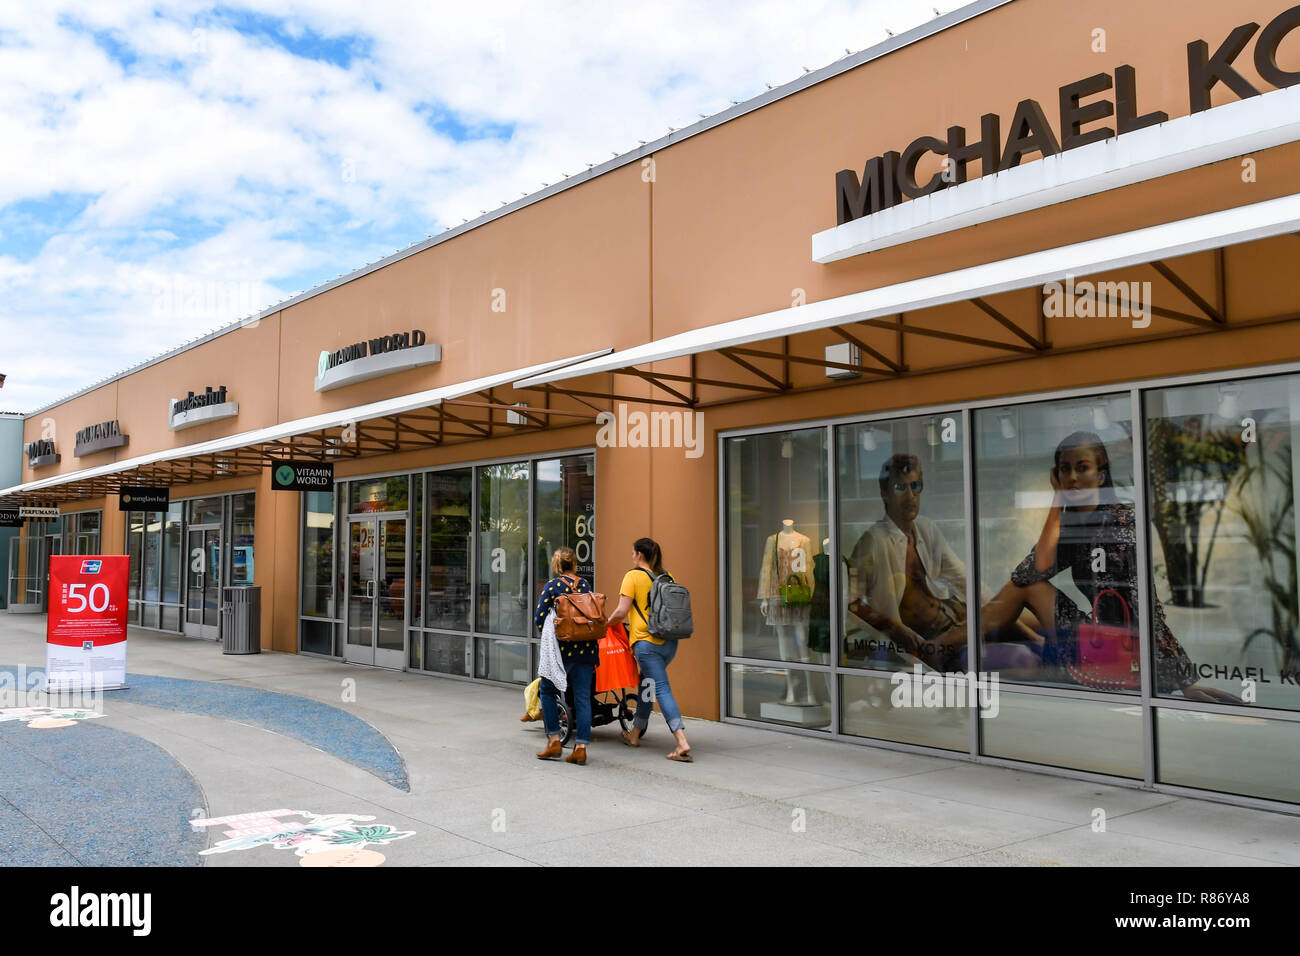 michael kors outlet tulalip